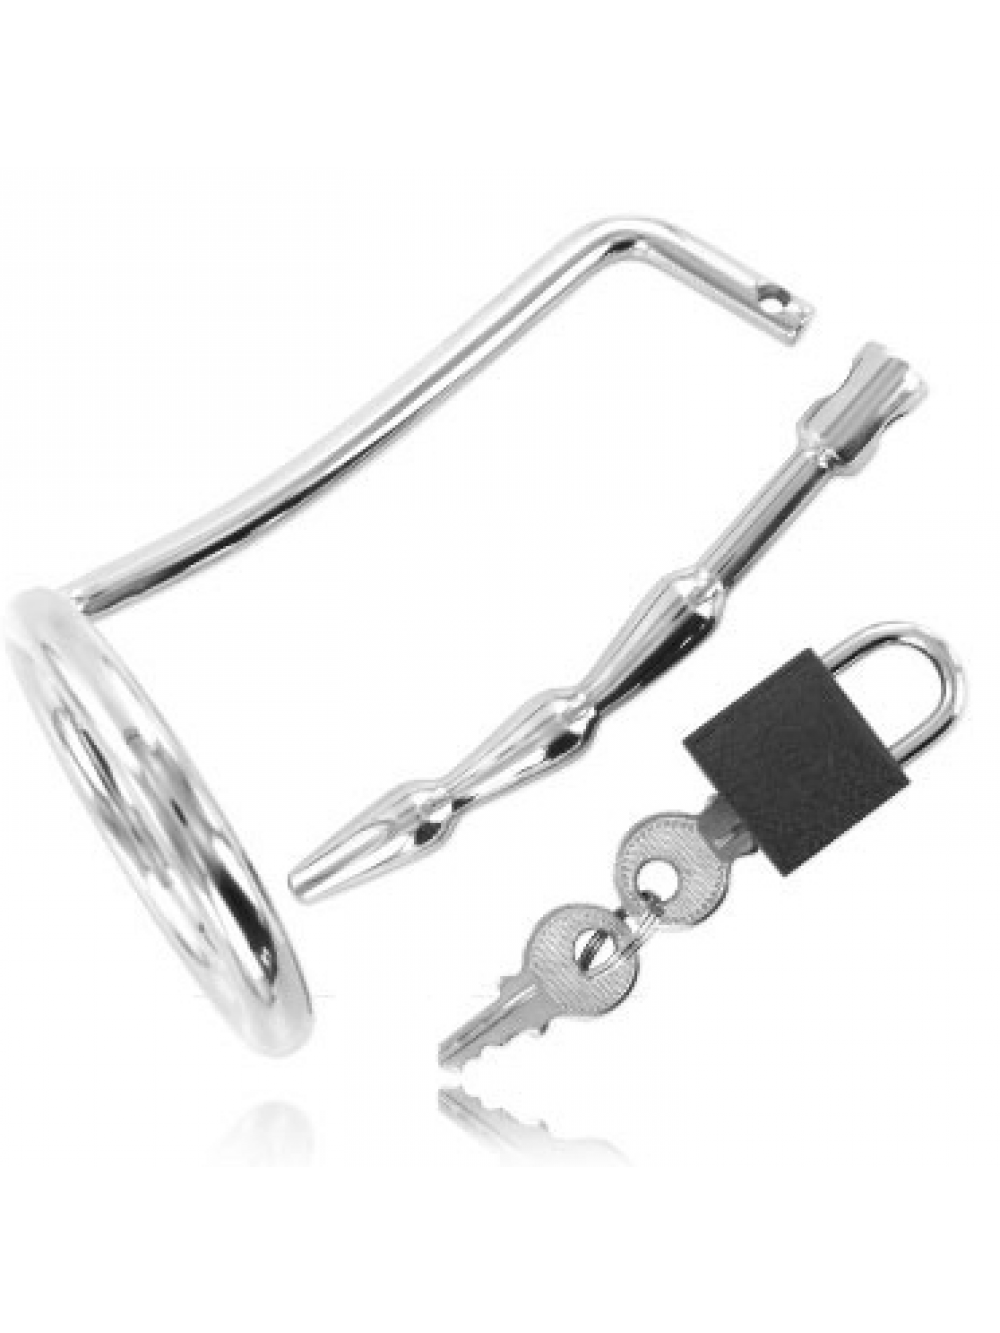 METAL HARD CHASTITY COCK RING URETRAL 8439004005370